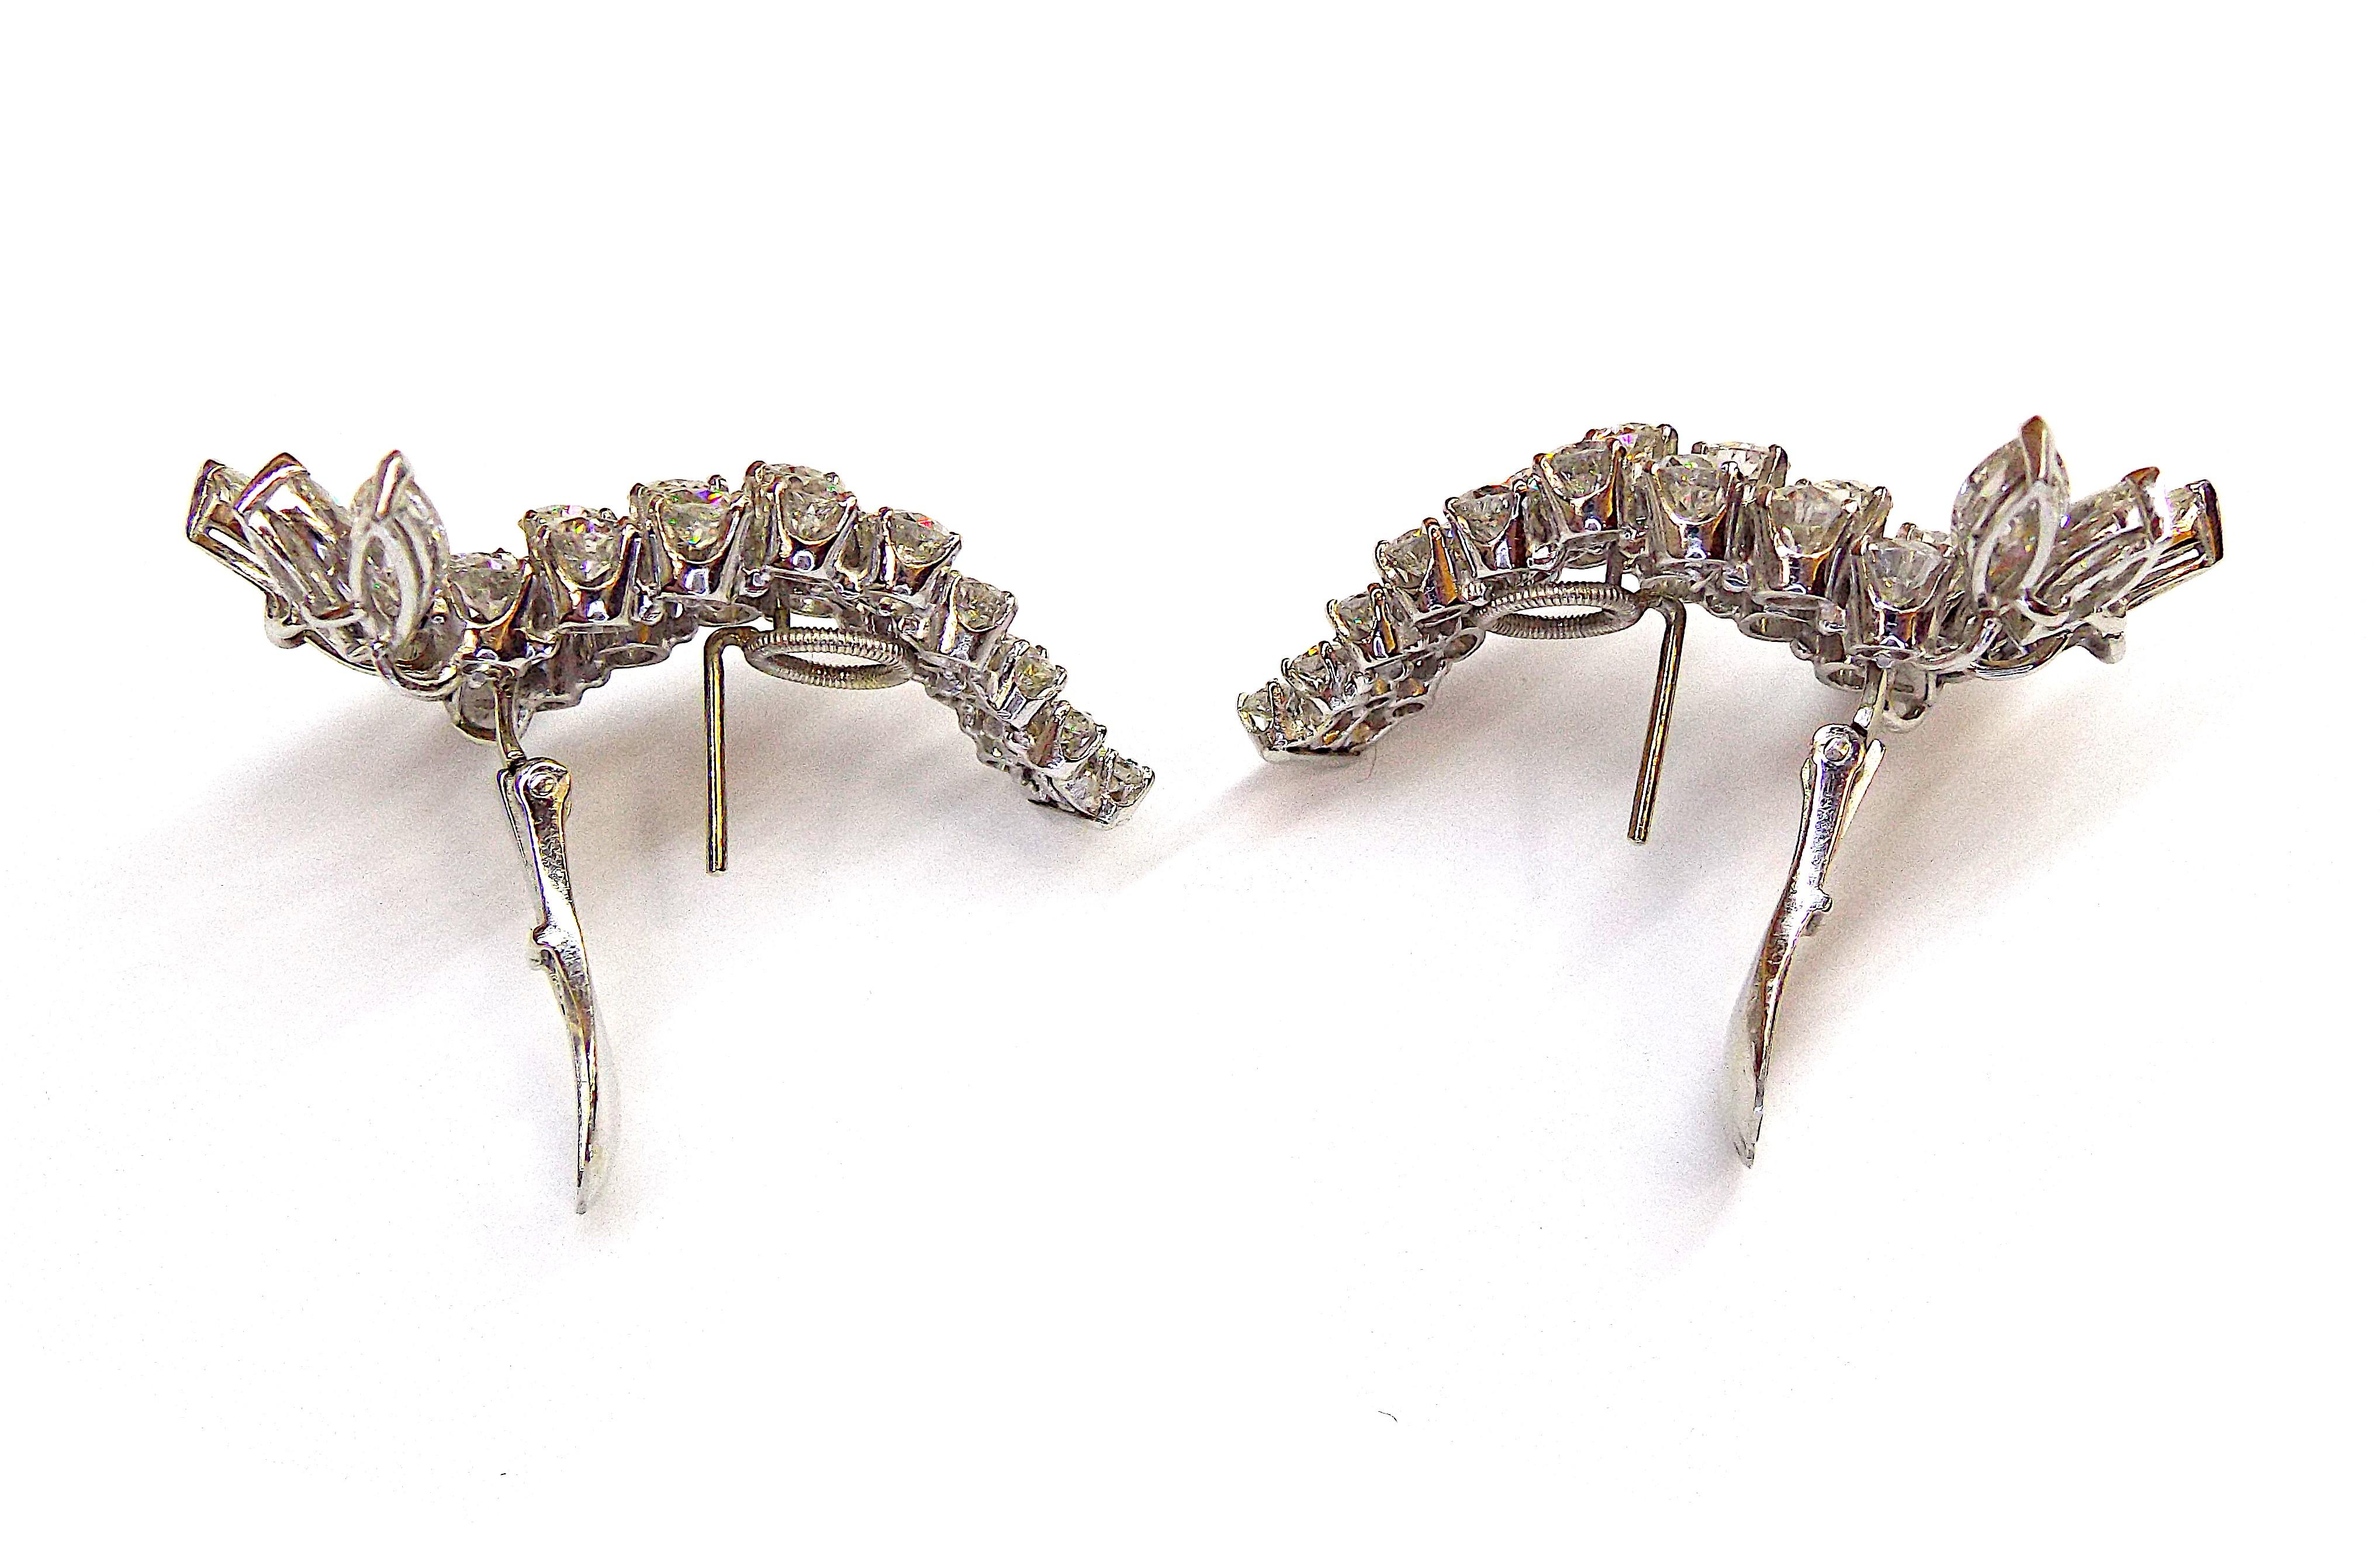 David Webb platinum diamond earrings. Total diamond weight is approximately 14.38ct. Length is approximately 1 5/8 inches. Gross weight is approximately 24.4 grams. Signed Webb. The earrings are designed for pierced ears.